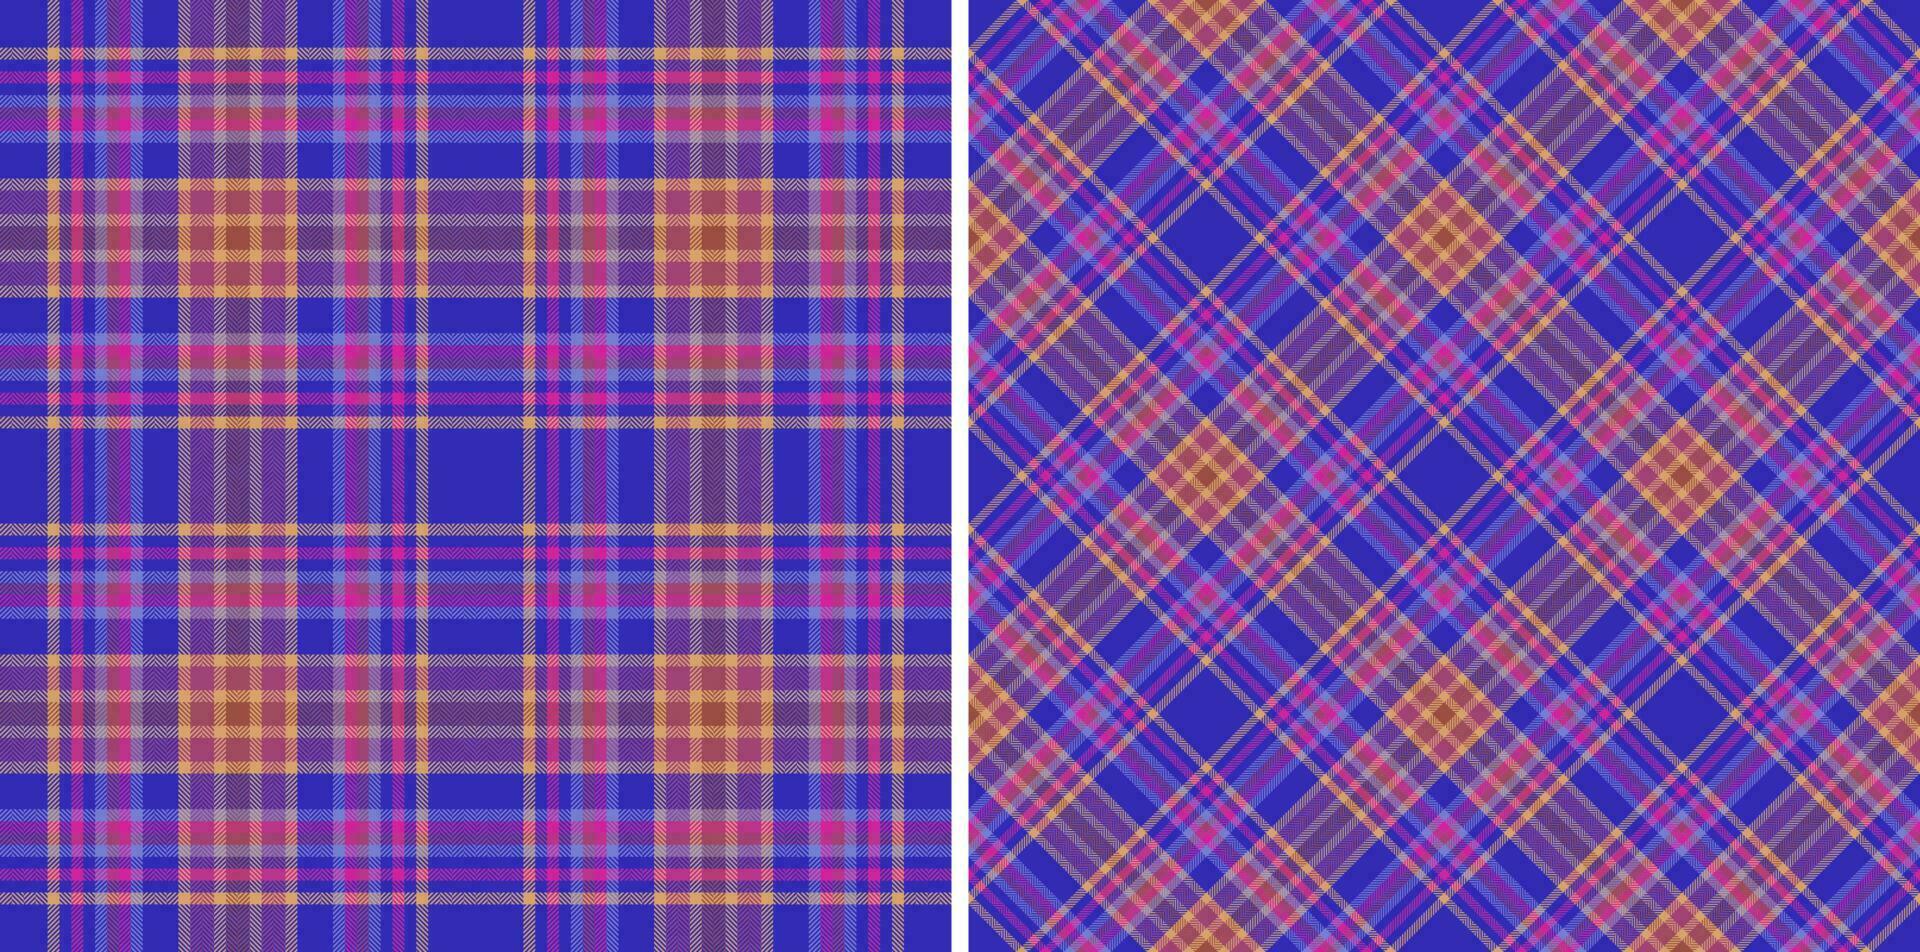 Textile fabric tartan of vector seamless pattern with a check texture plaid background.